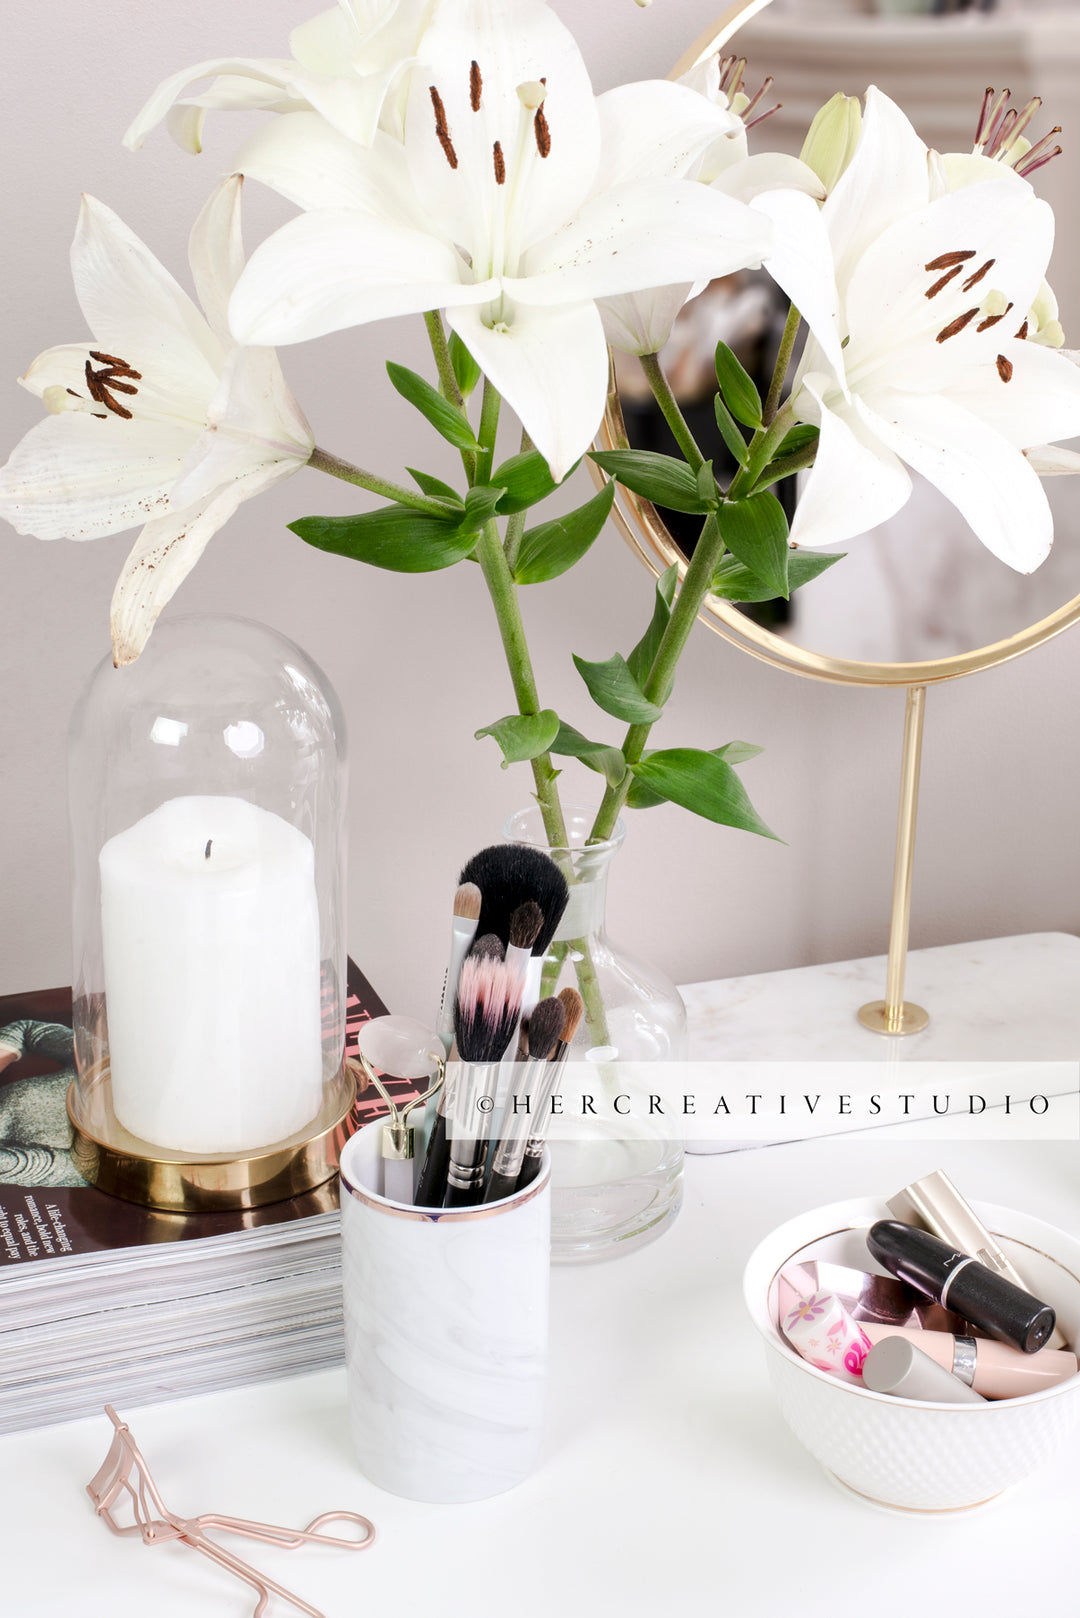 Lillies & Makeup on Table, Styled Stock